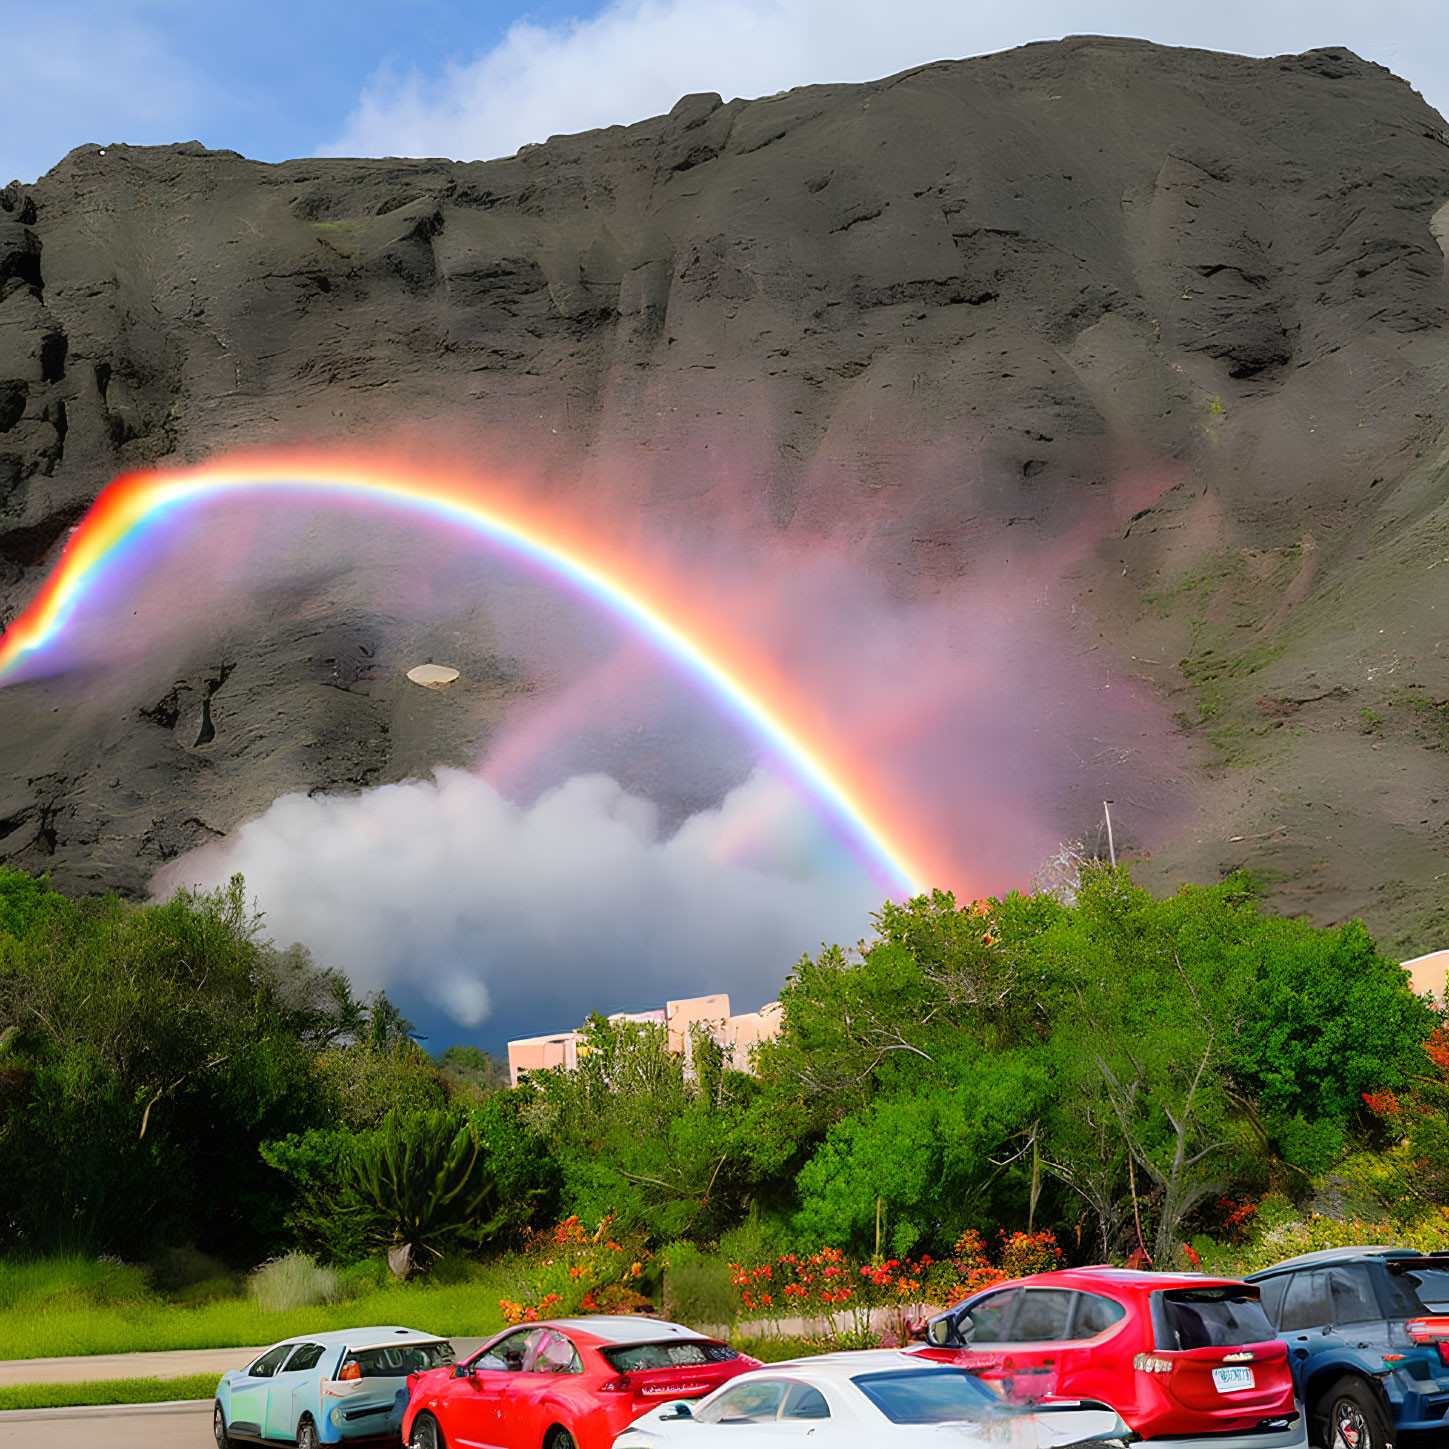 Colorful rainbow over parking lot with cars and hillside landscape